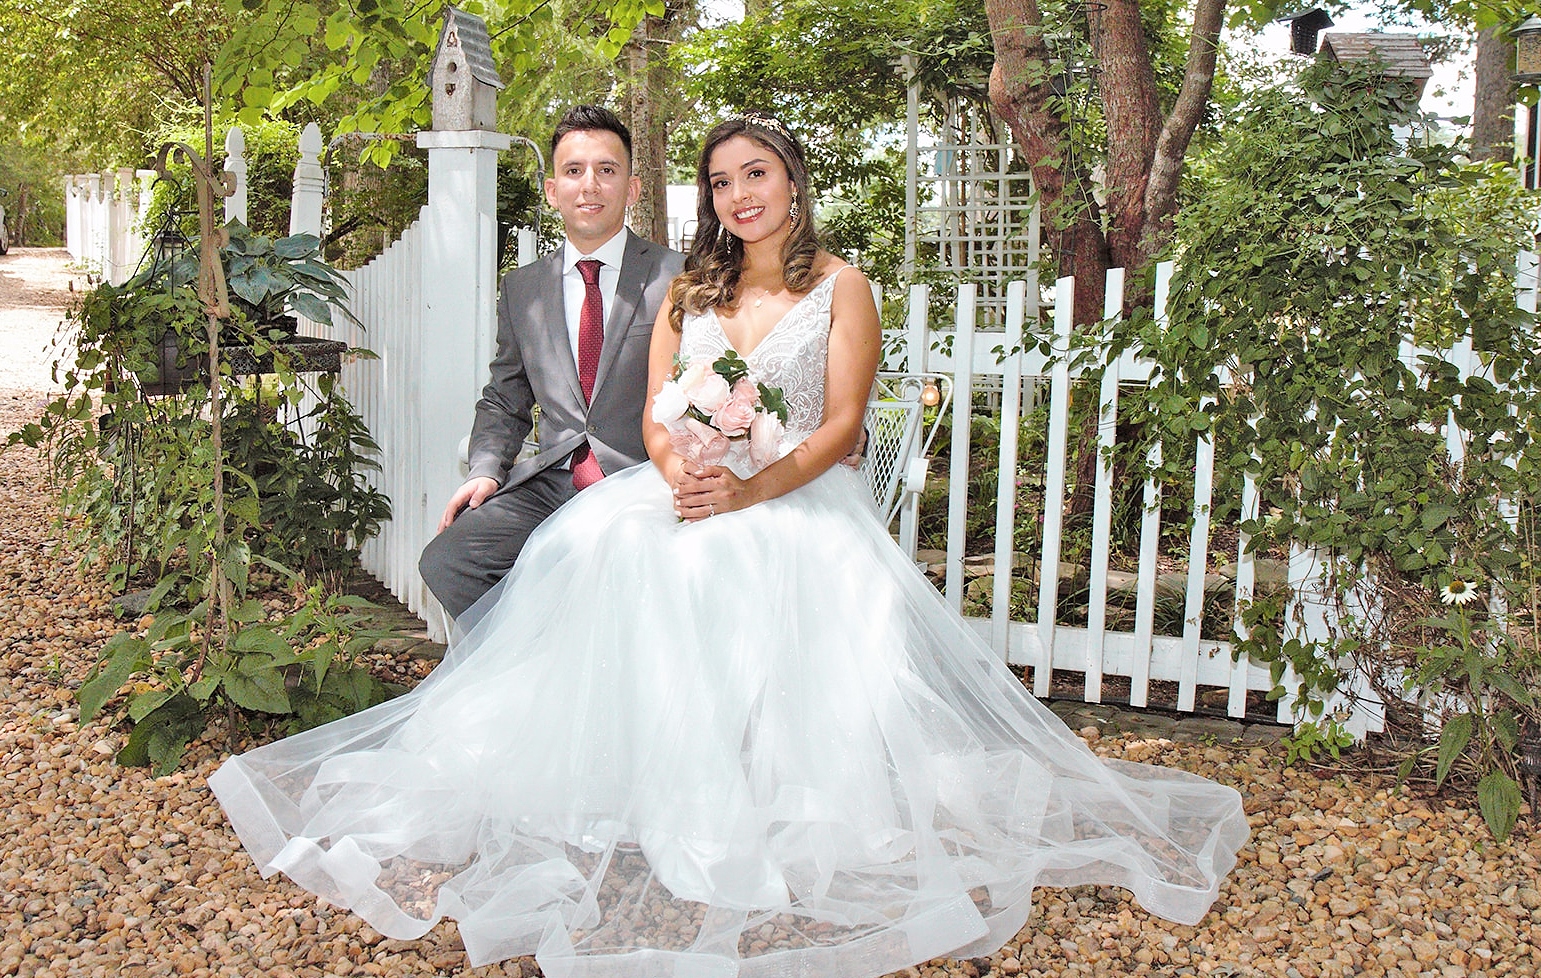 Bride and groom pose on white bench in front of picket fence.